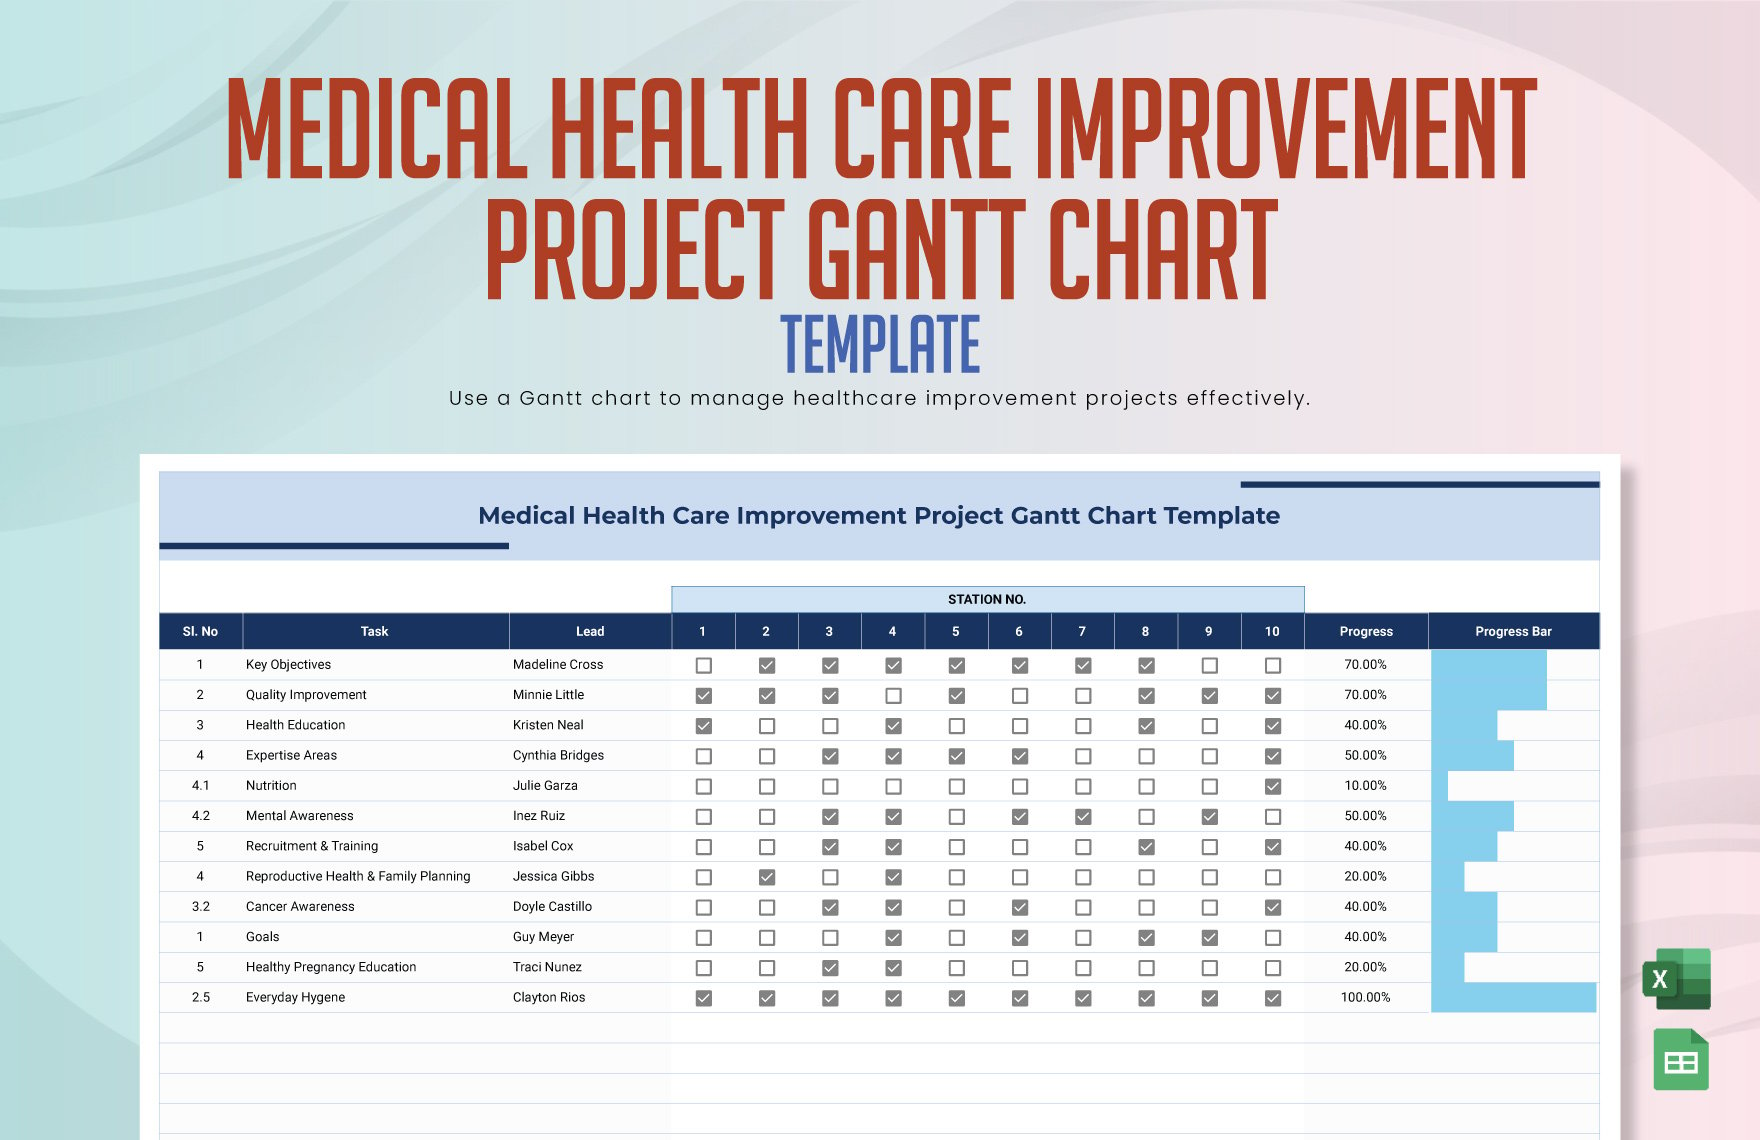 Medical Health Care Improvement Project Gantt Chart Template in Excel, Google Sheets